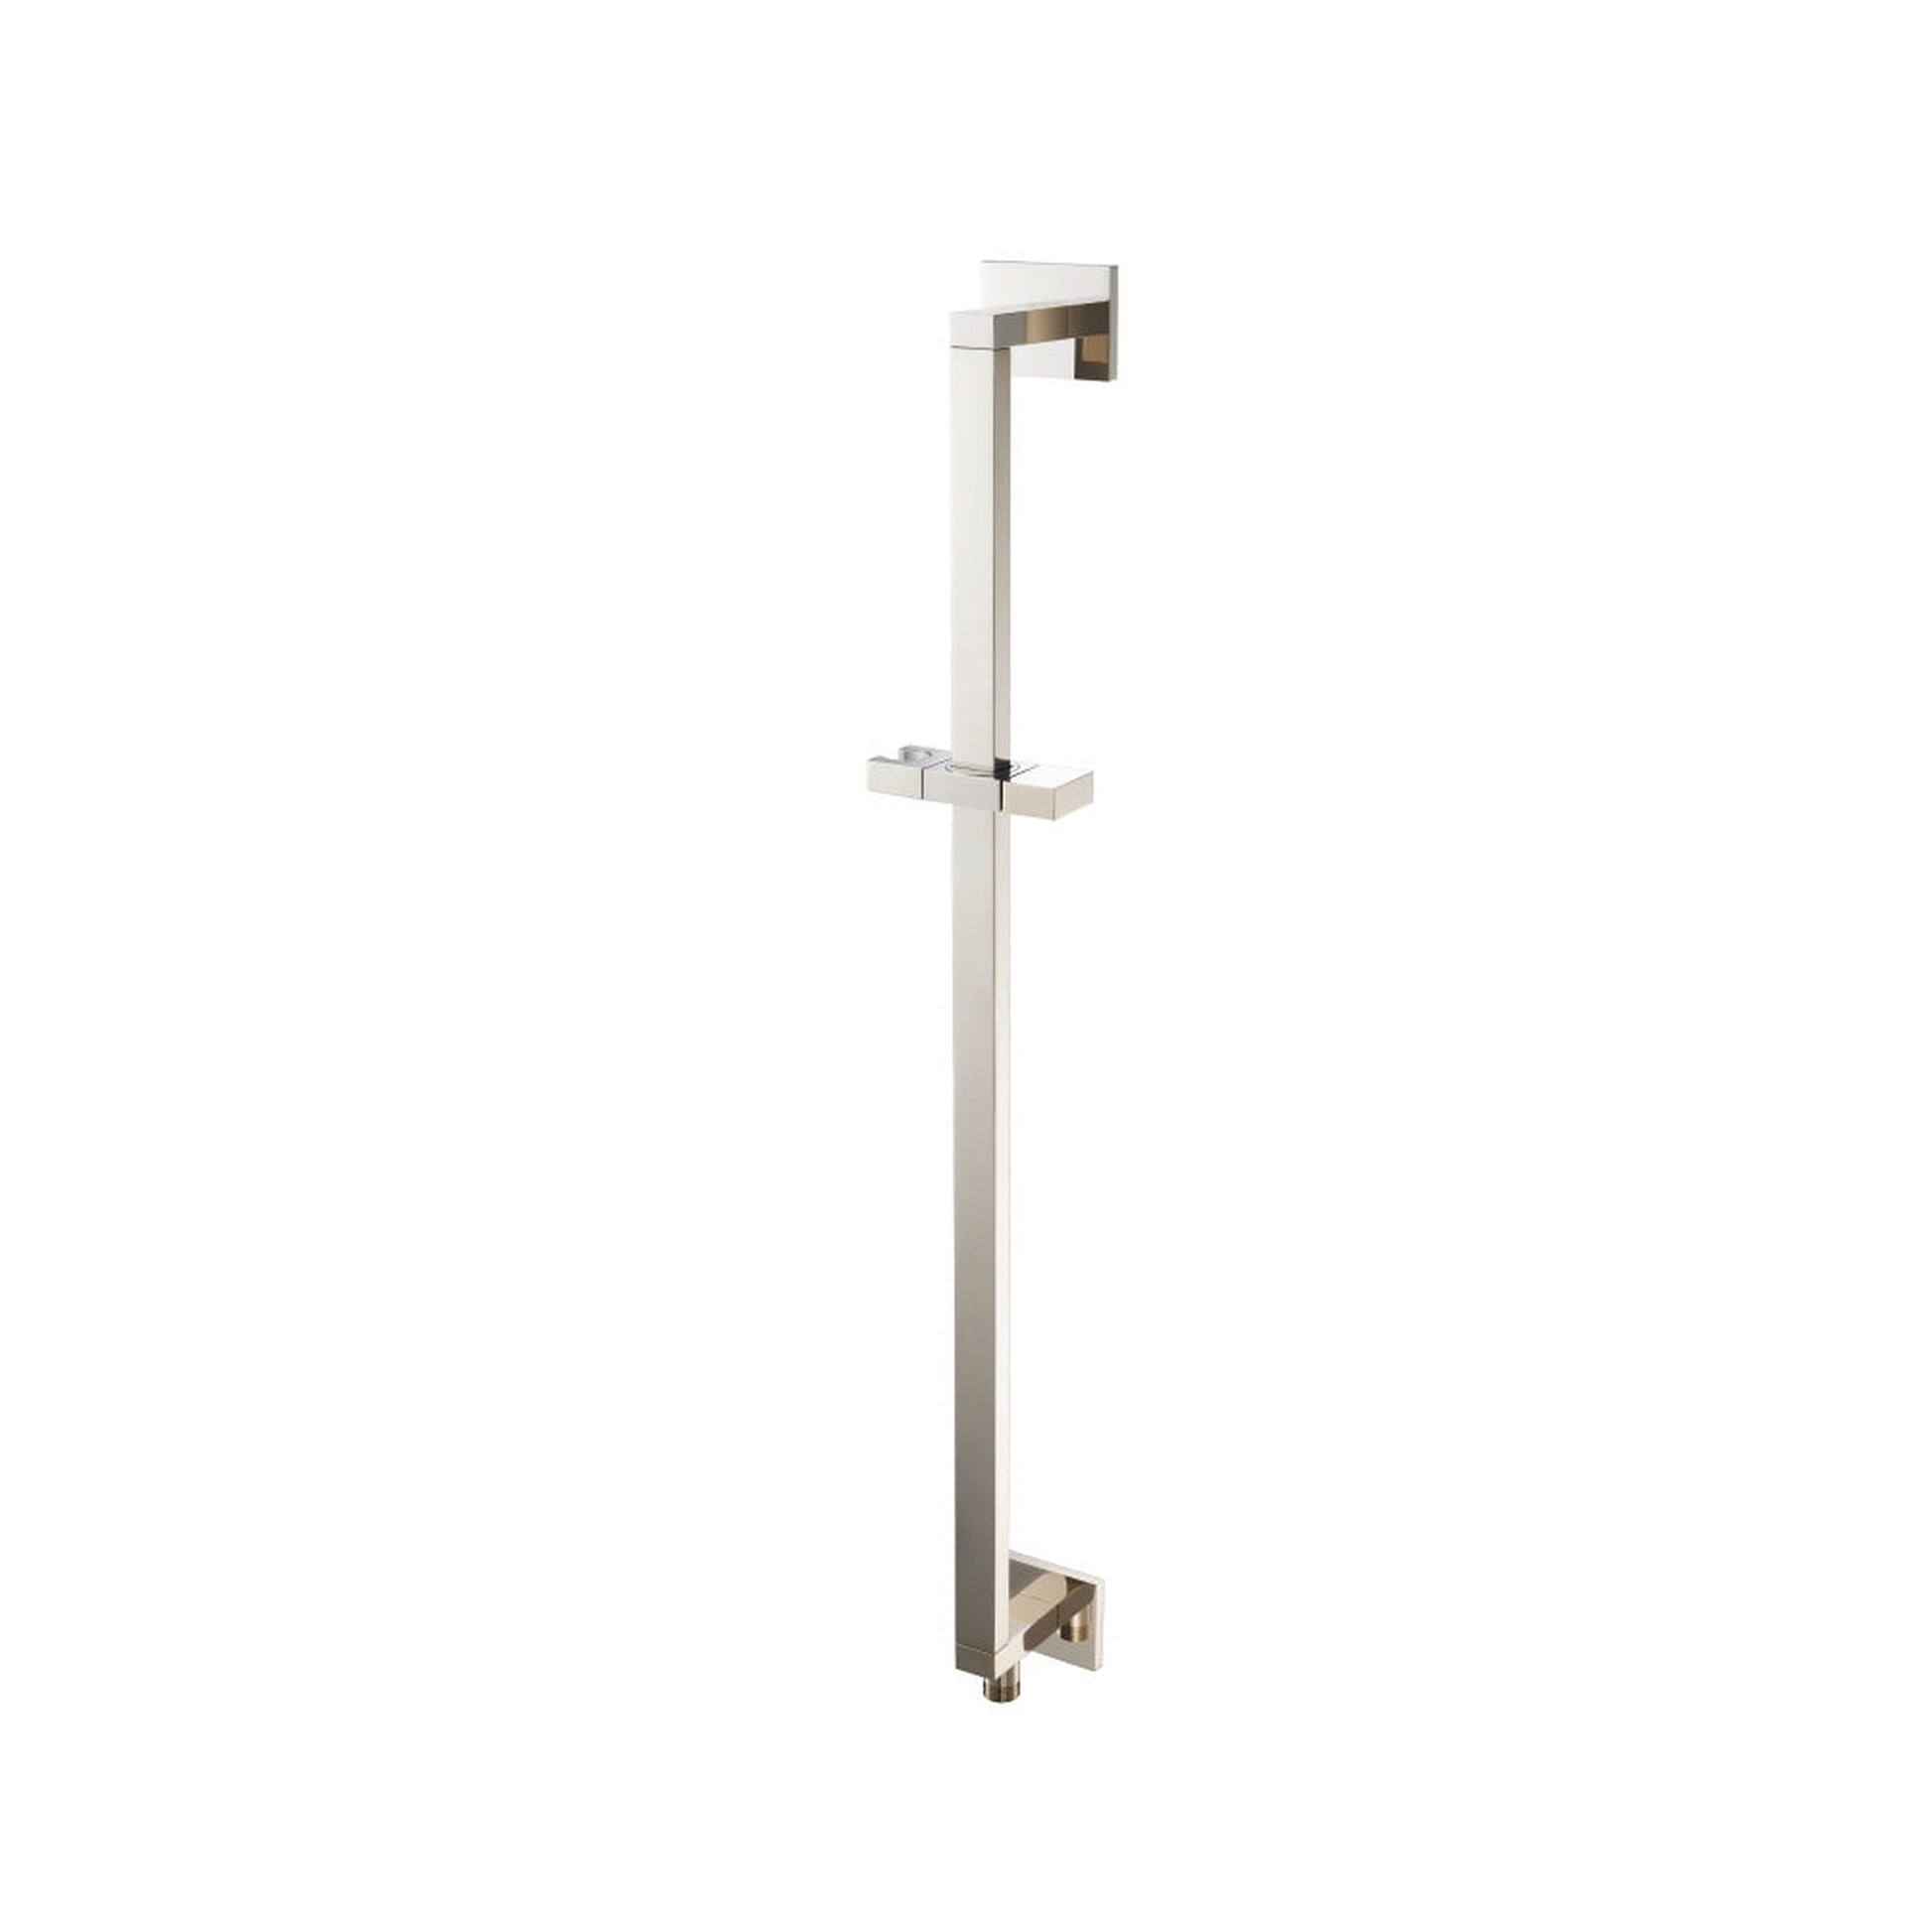 Isenberg Serie 160 Shower Slide Bar With Integrated Wall Elbow in Polished Nickel